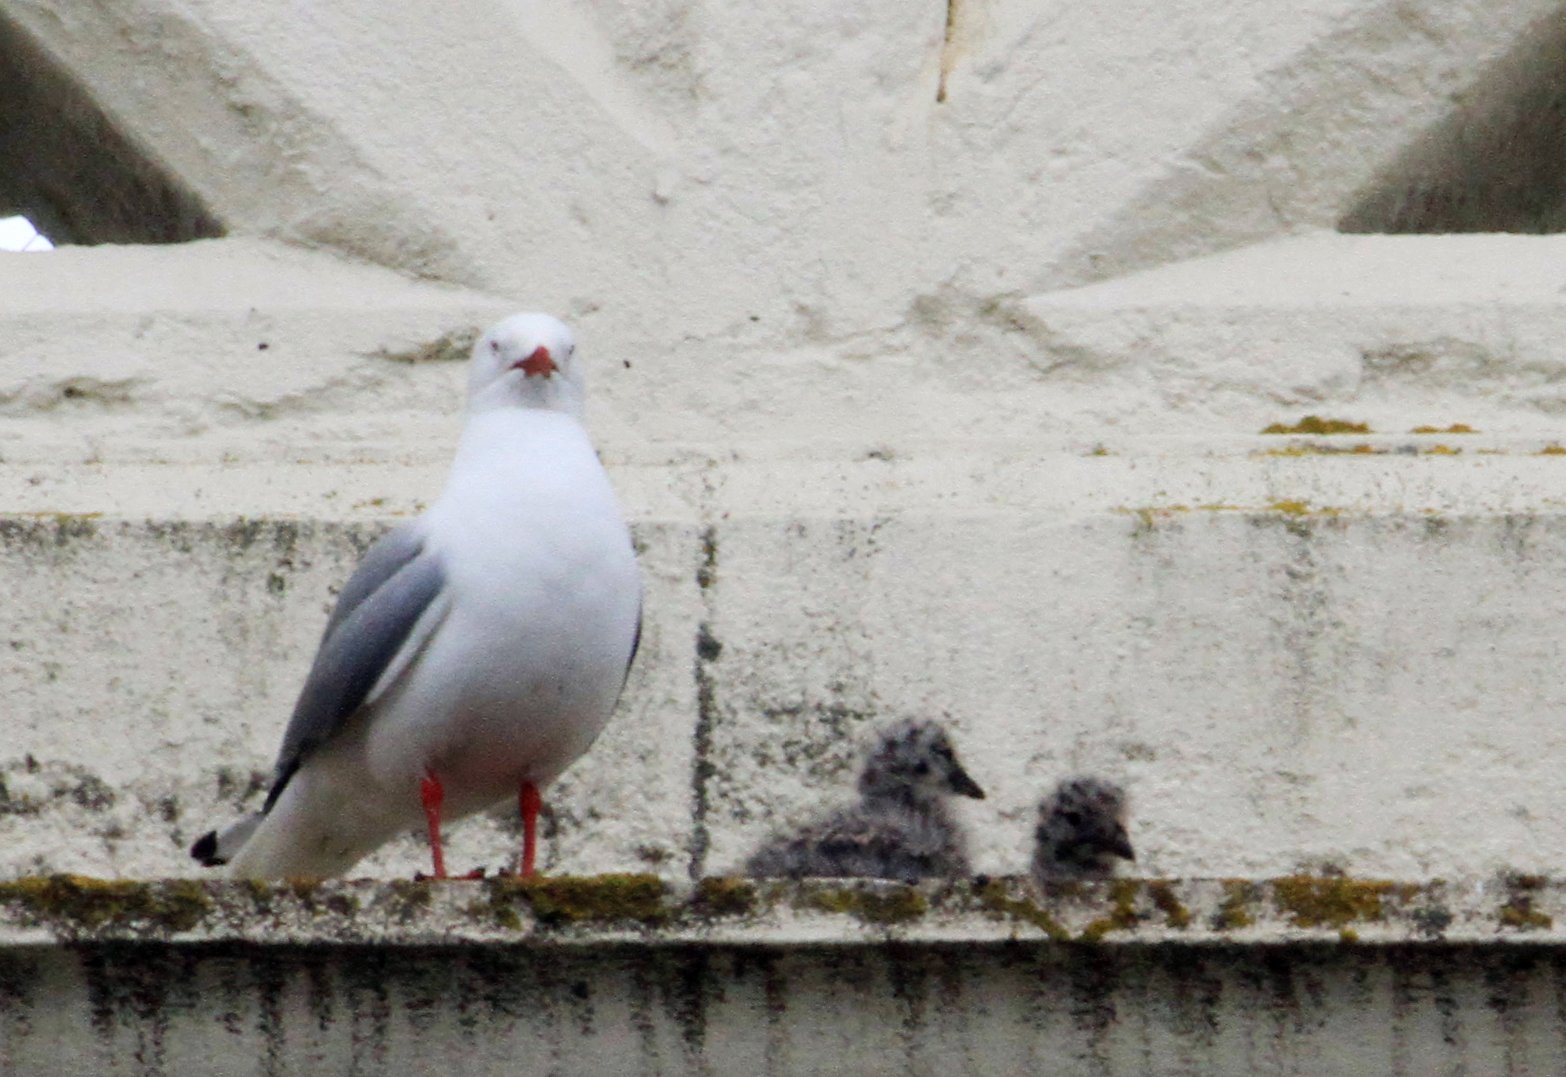 A red-billed gull and its two chicks on a ledge of a Thames St building. PHOTO: HAMISH MACLEAN